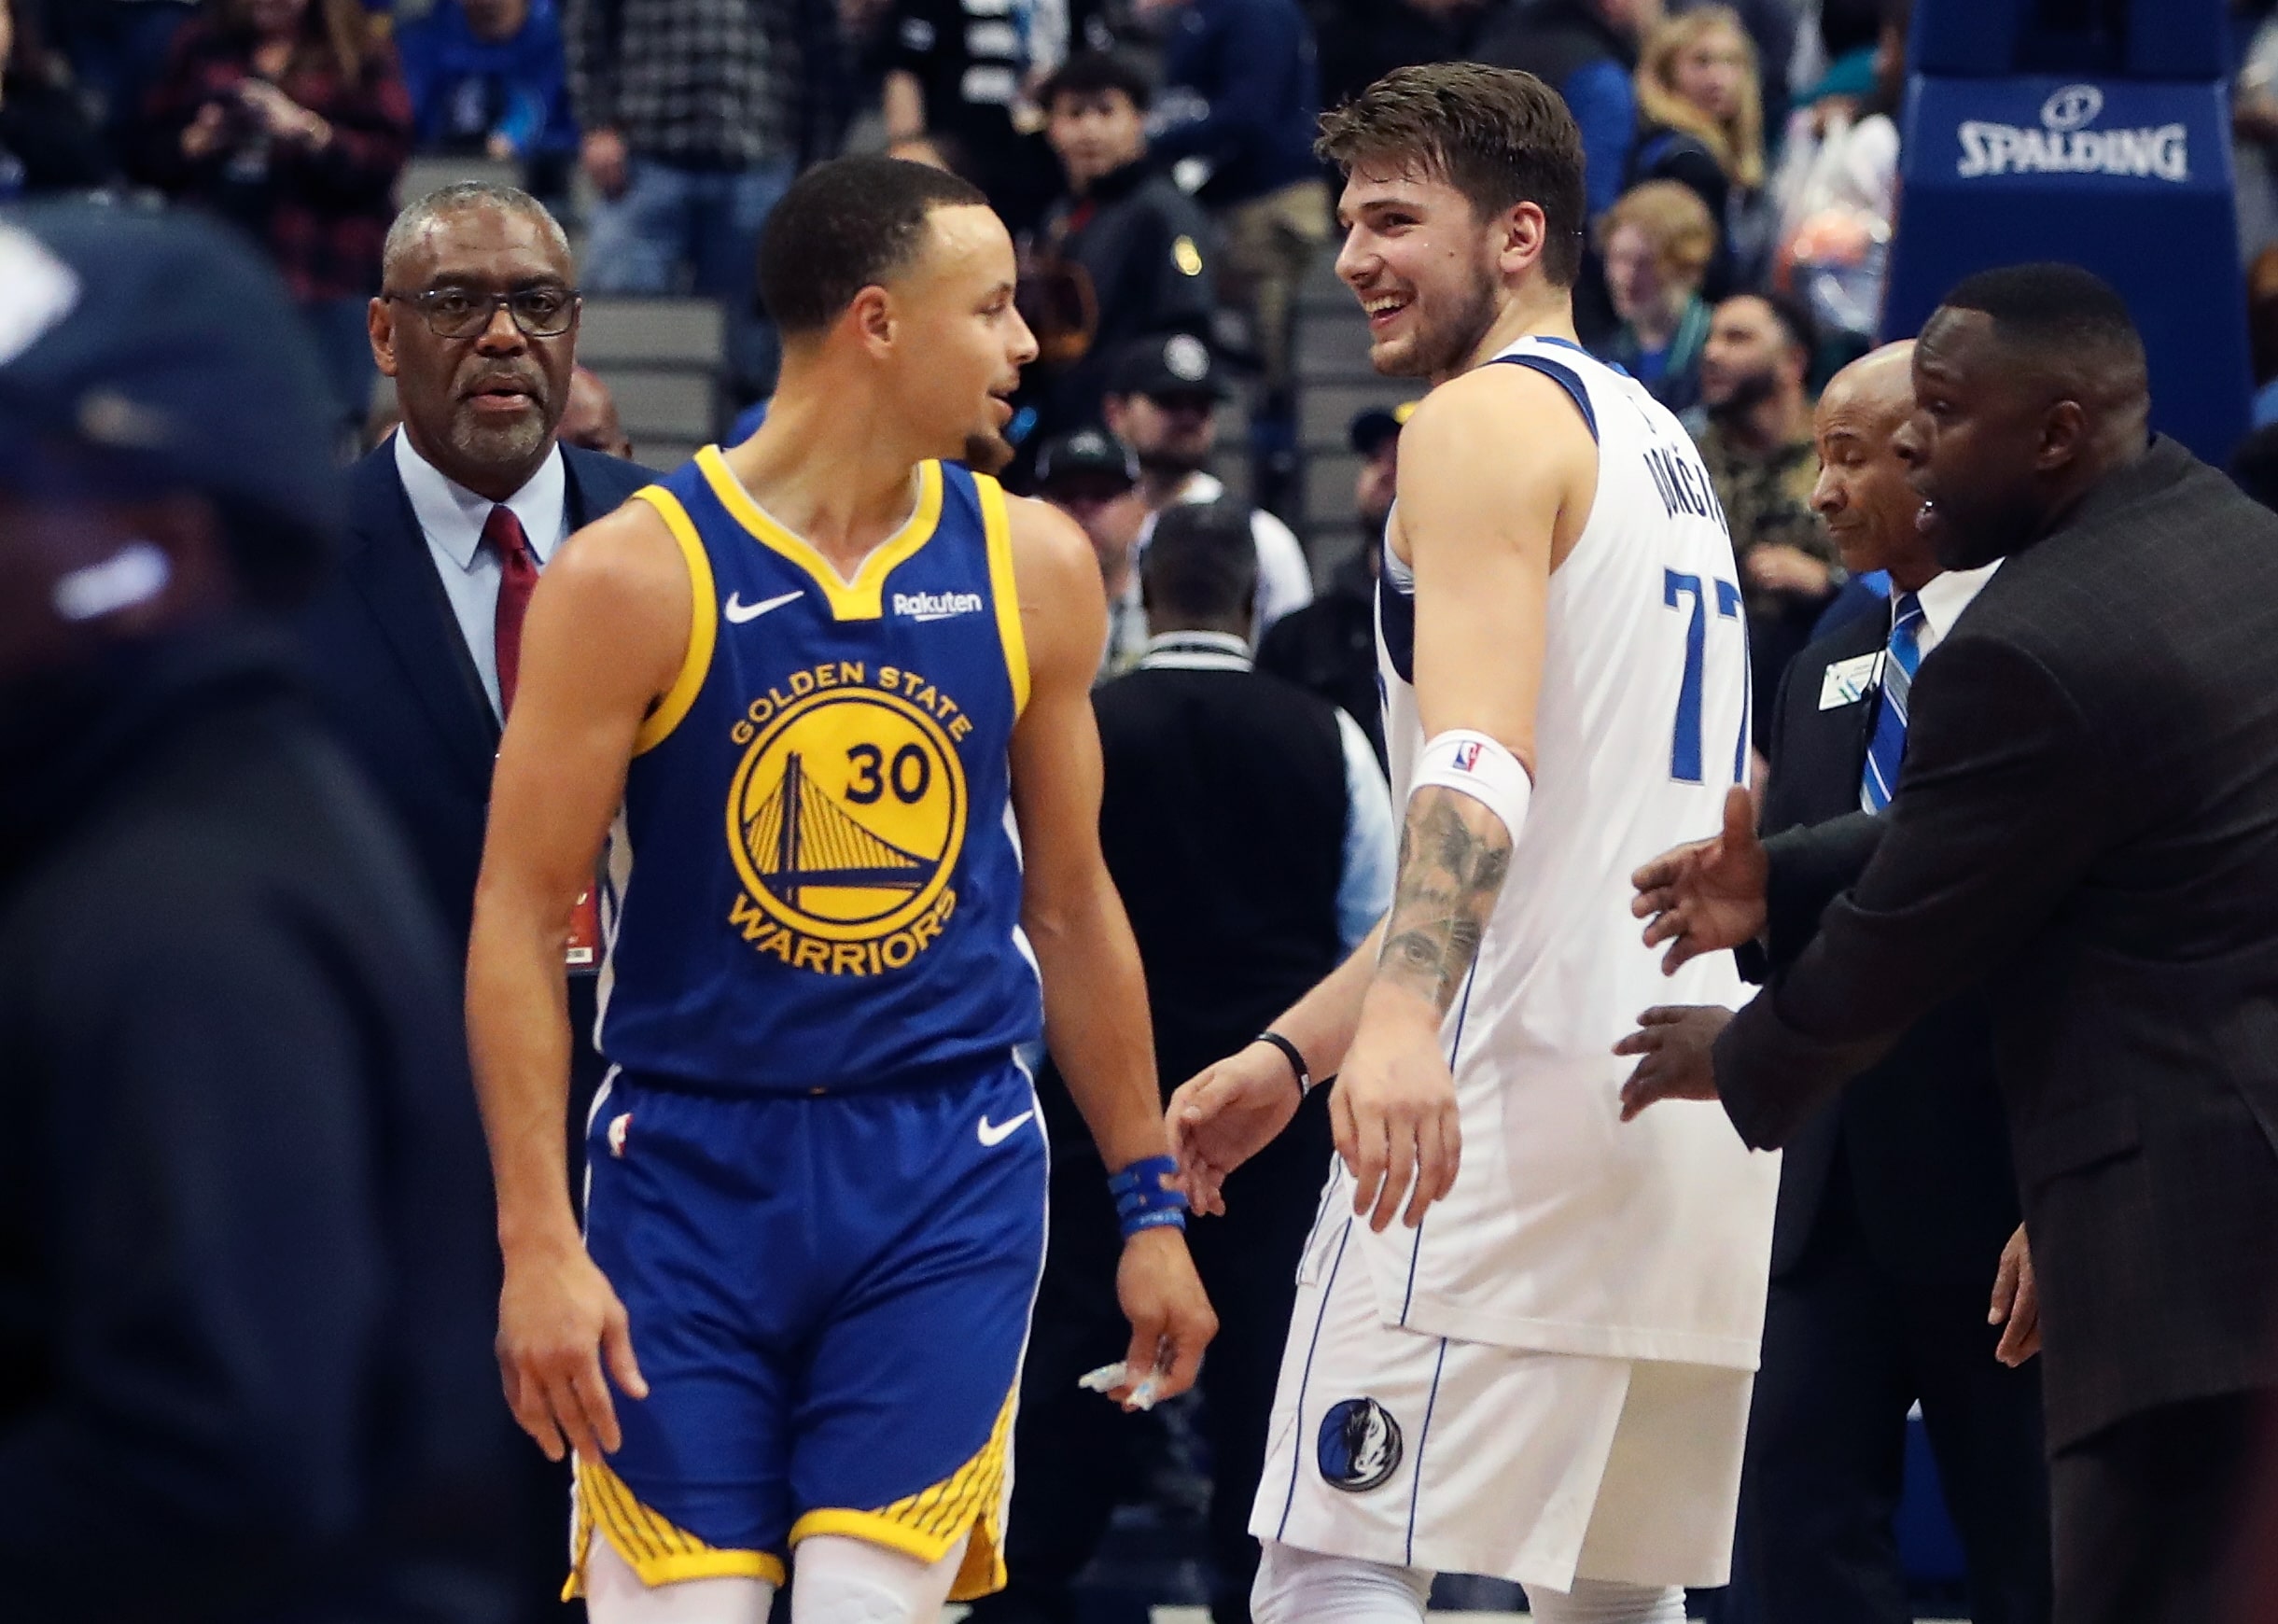 Golden State Warriors guard Stephen Curry and Dallas Mavericks guard Luka Doncic talk after game